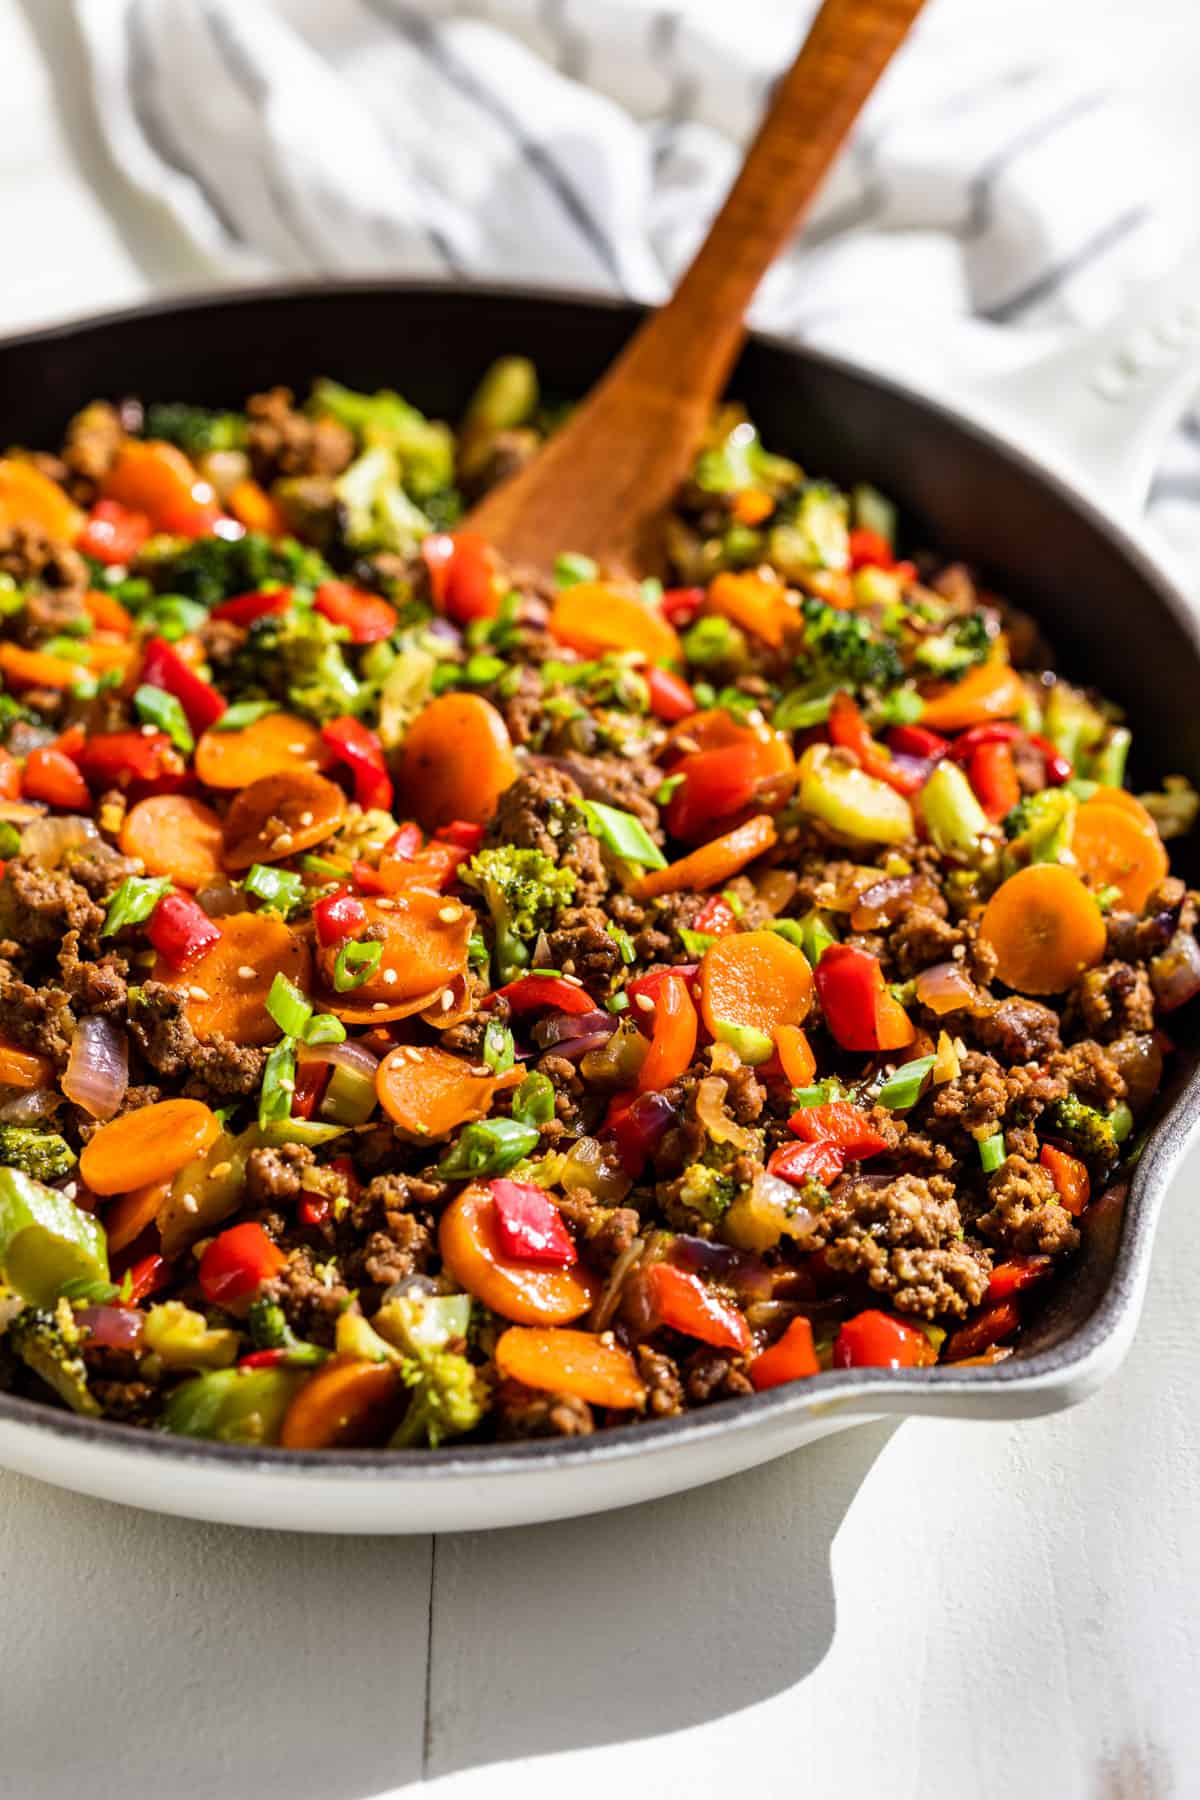 Ground Beef Stir Fry with Stir Fry Sauce in a large white skillet.